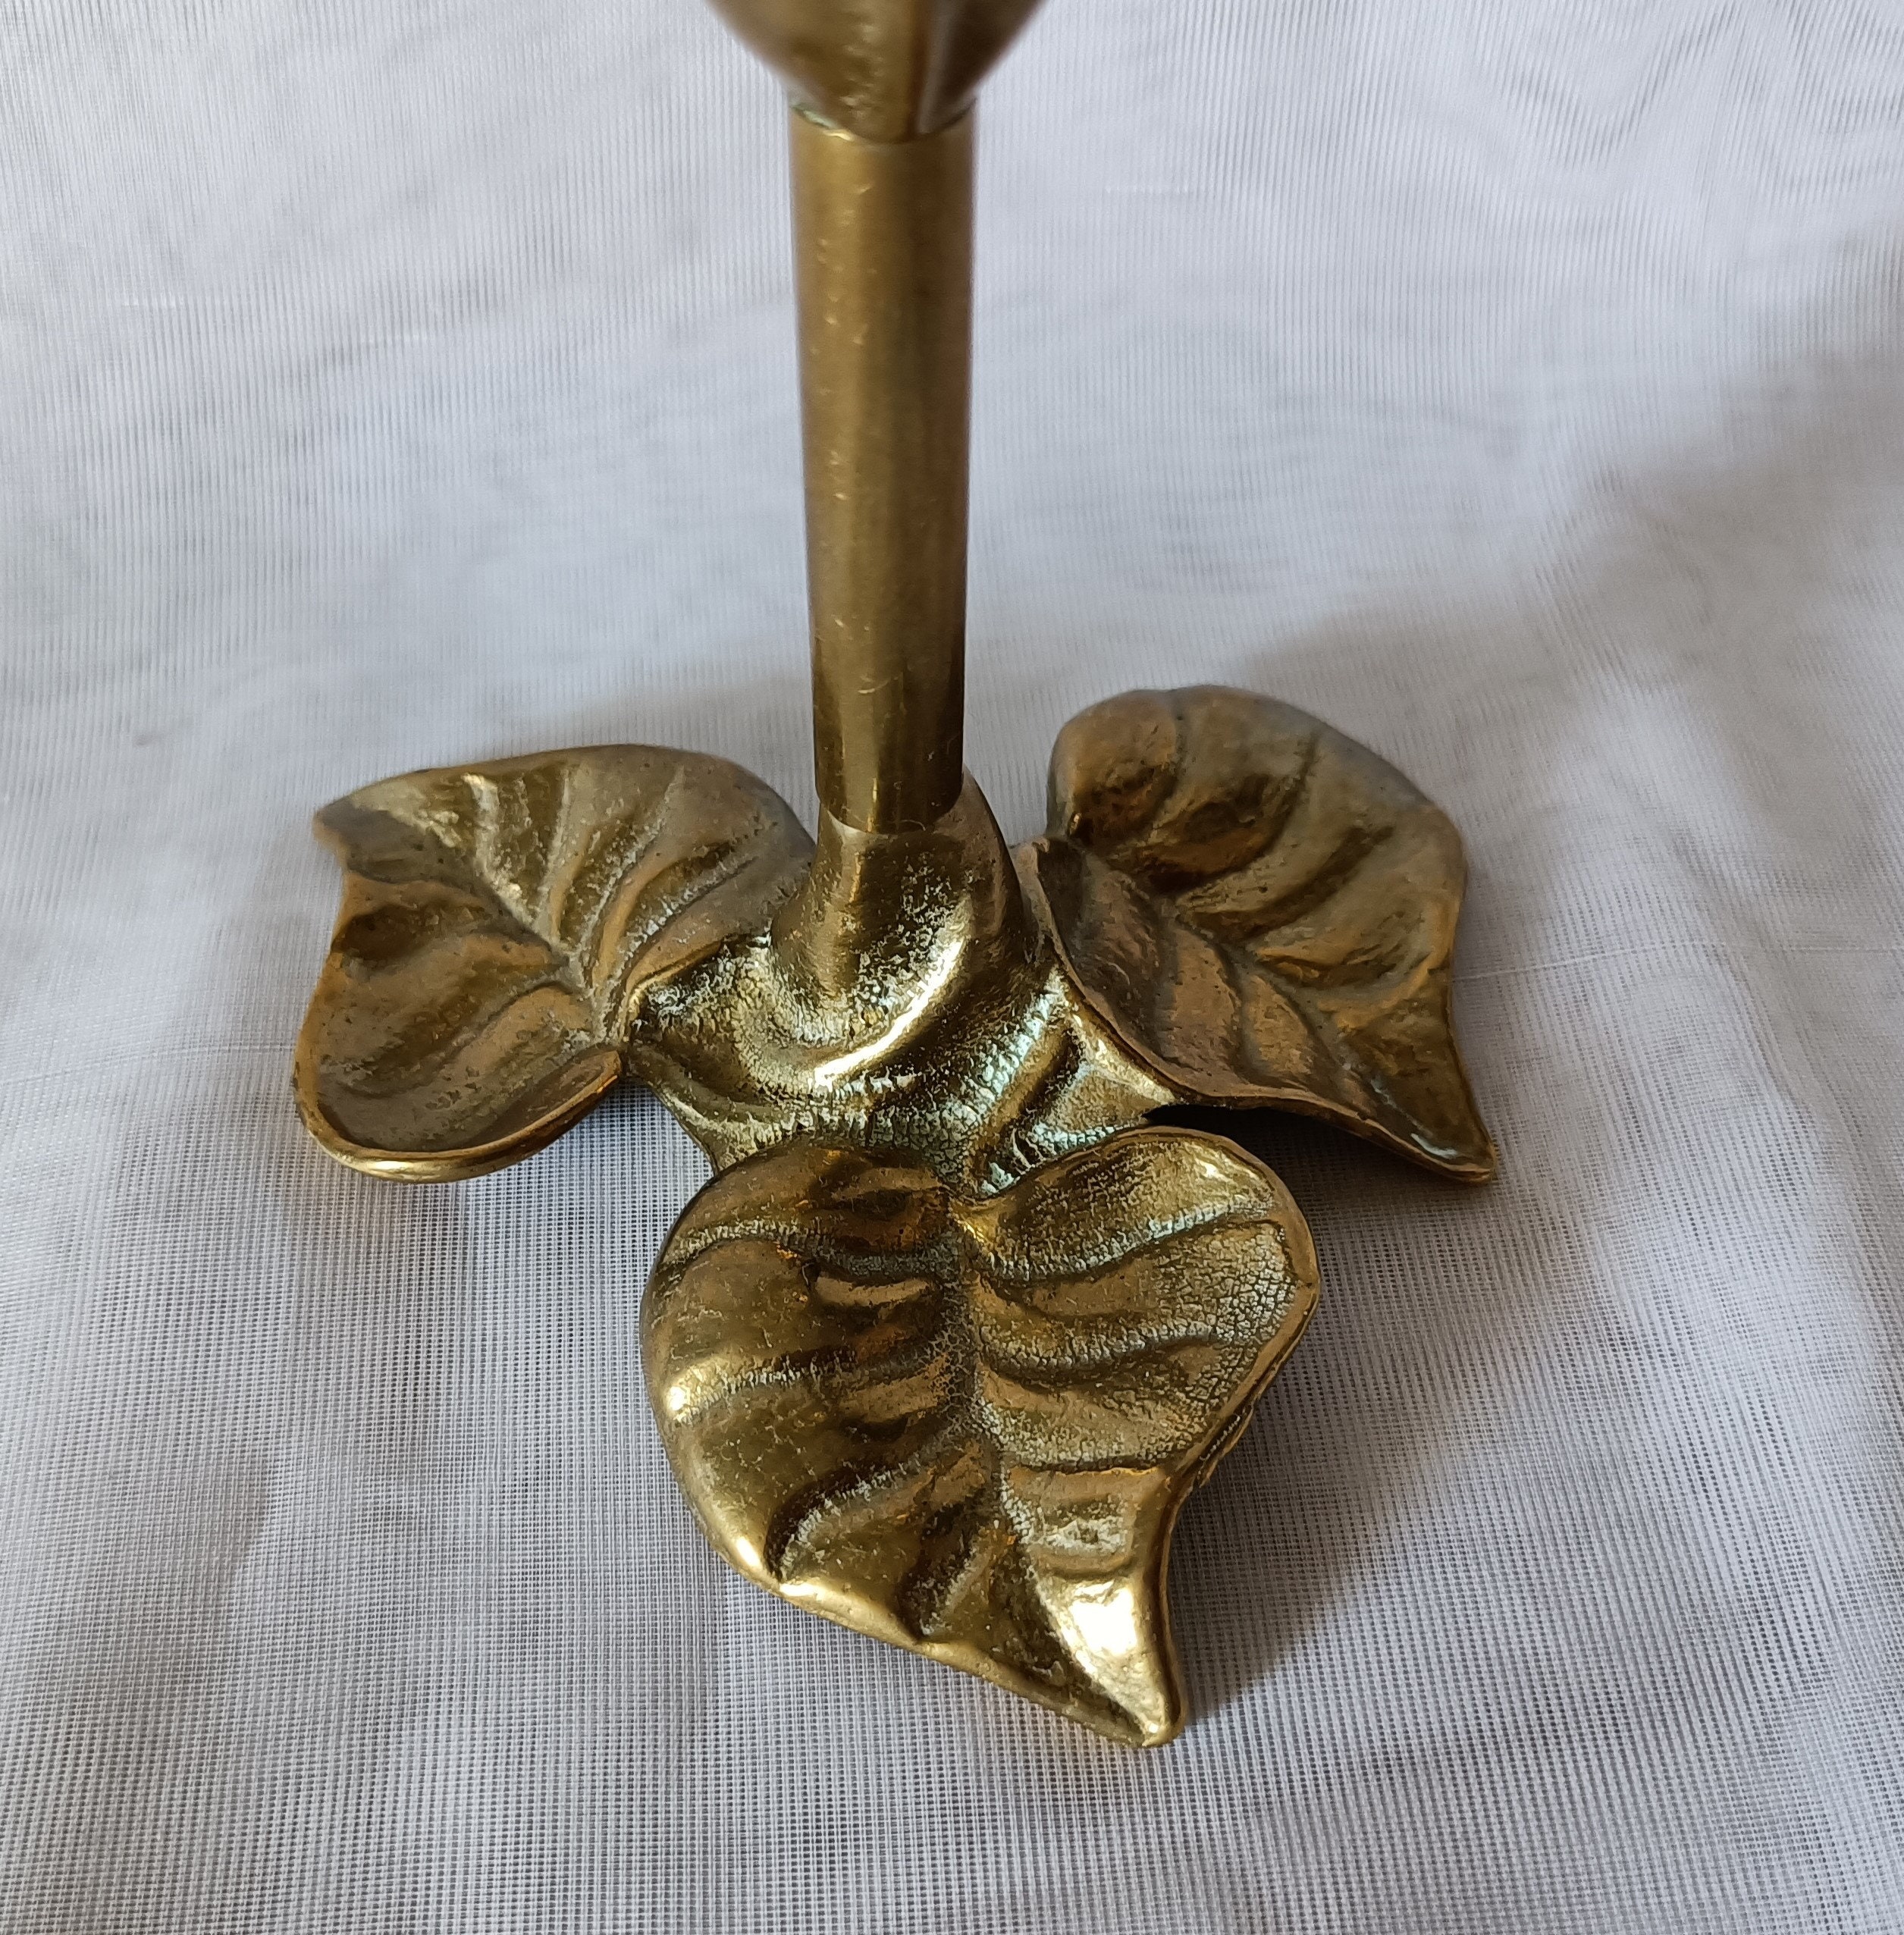 Polished Brass Chamberstick with Wooden Handle